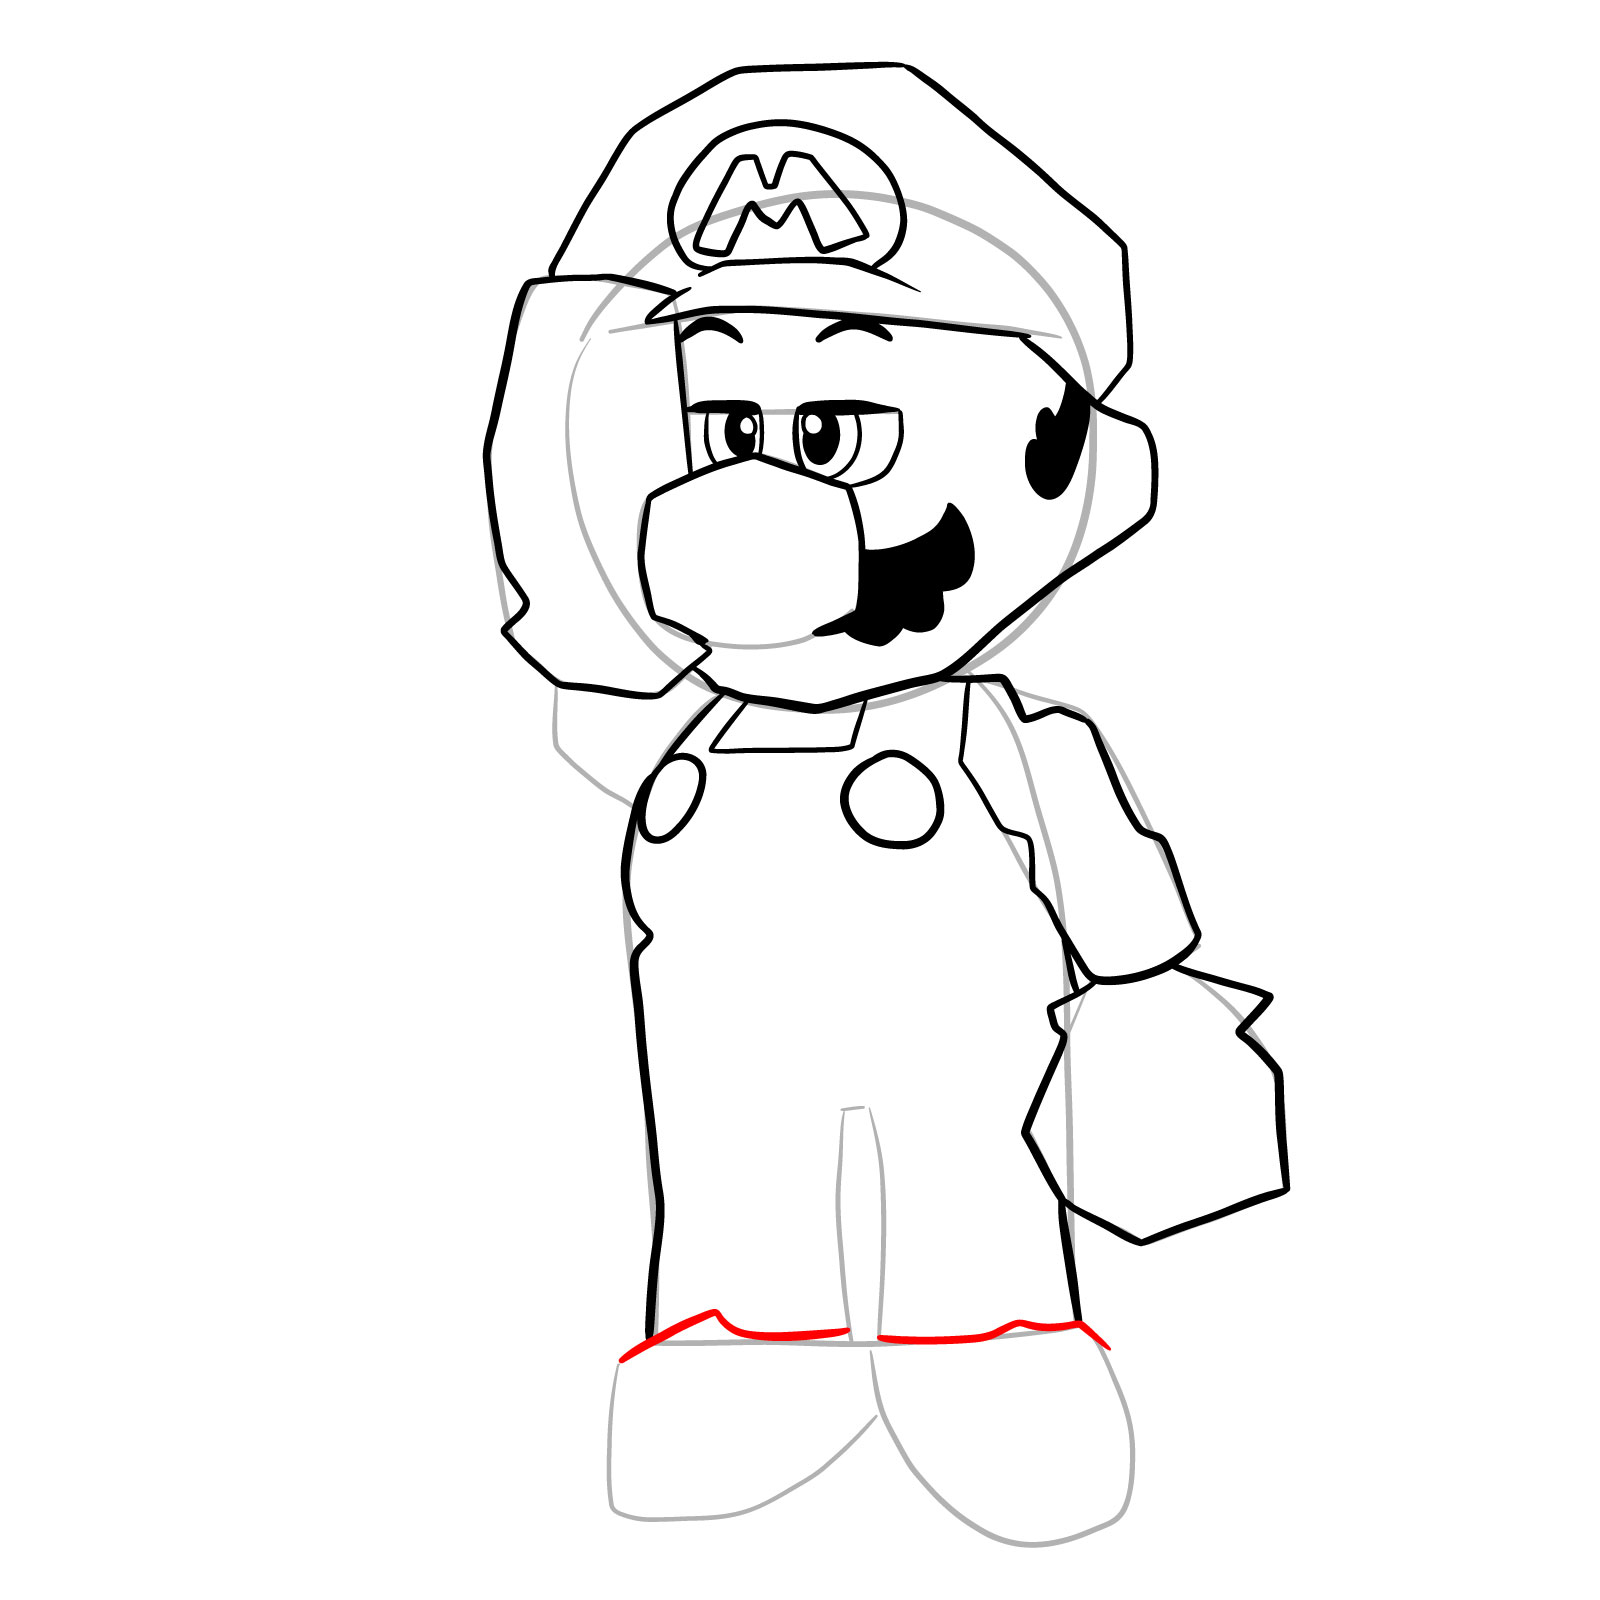 How to draw SuperMarioGlitchy4 (N64) - step 21